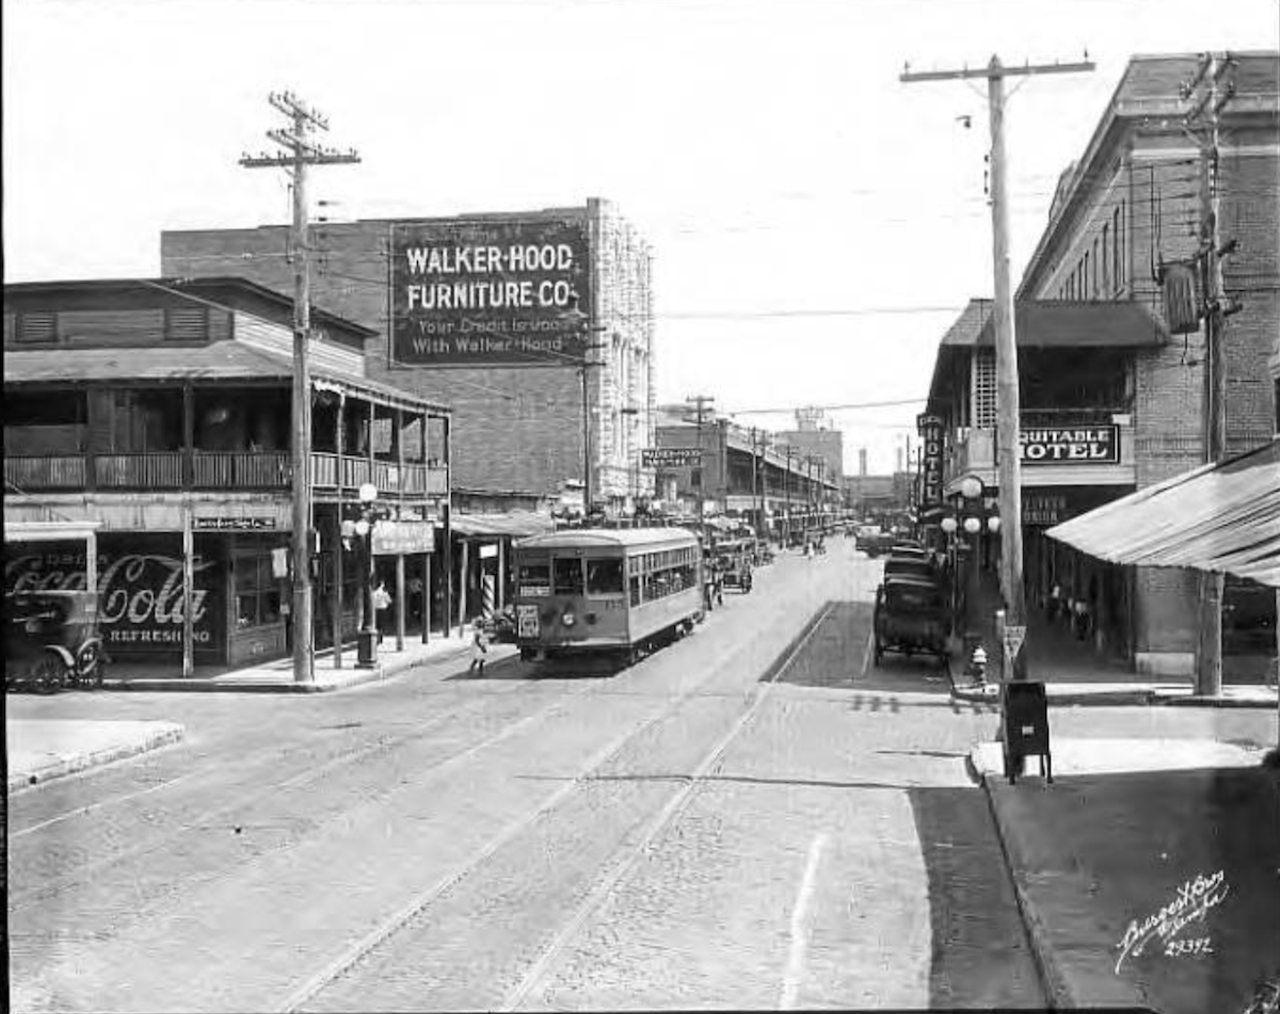 Franklin Street view south with Walker-Hood Furniture Company, Equitable Hotel and a streetcar in Tampa, Florida in 1929.  
Photo by Burgert Brothers via ia Tampa-Hillsborough County Public Library System